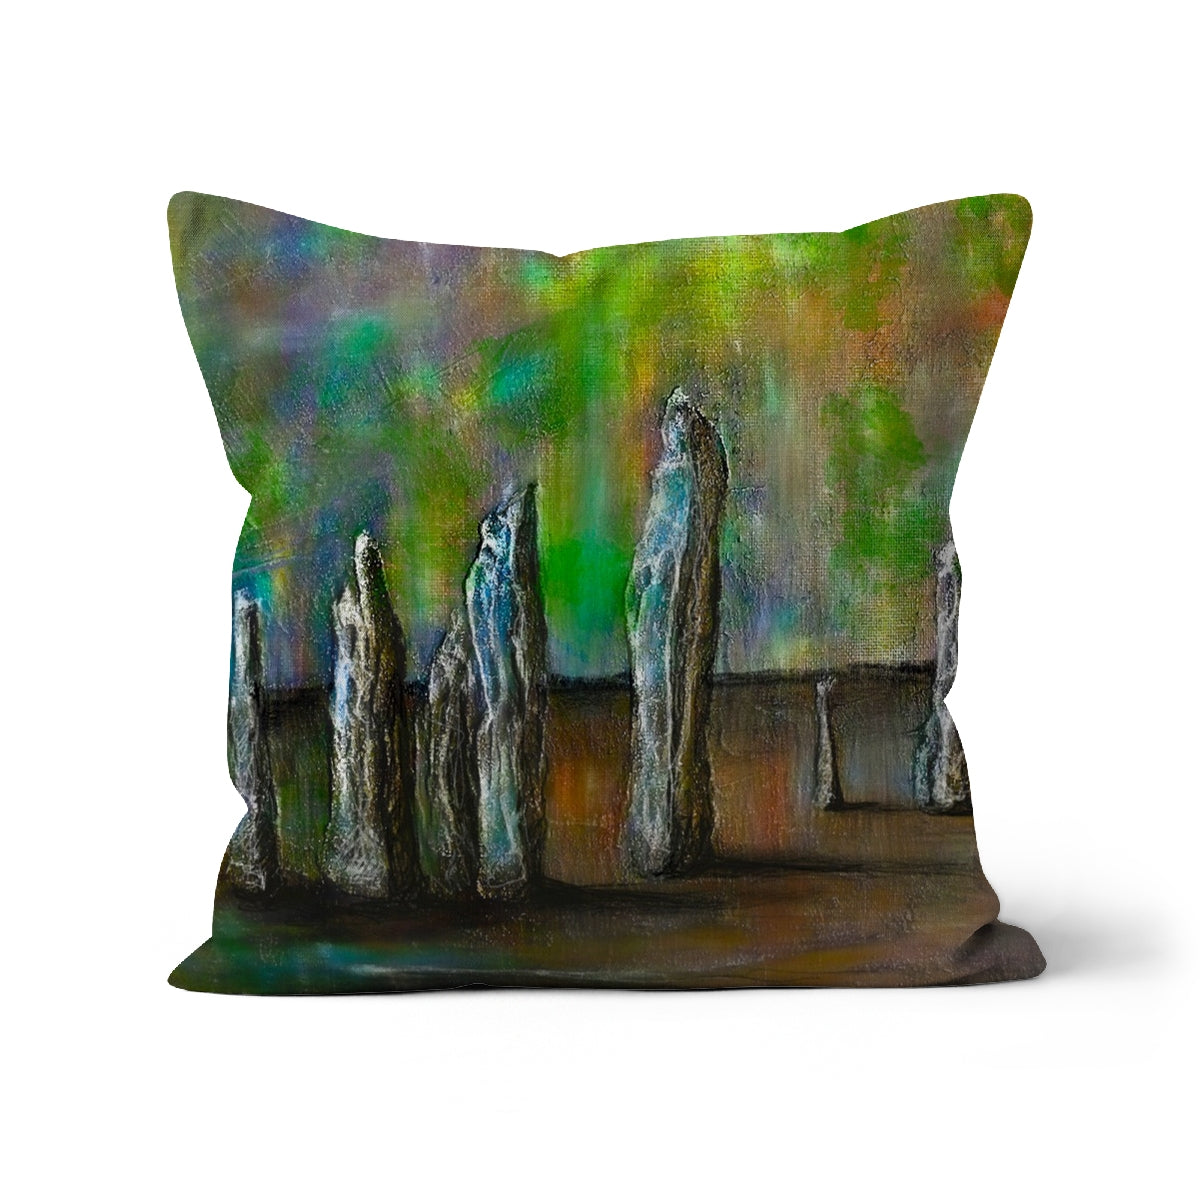 Callanish Northern Lights Art Gifts Cushion-Cushions-Hebridean Islands Art Gallery-Linen-24"x24"-Paintings, Prints, Homeware, Art Gifts From Scotland By Scottish Artist Kevin Hunter